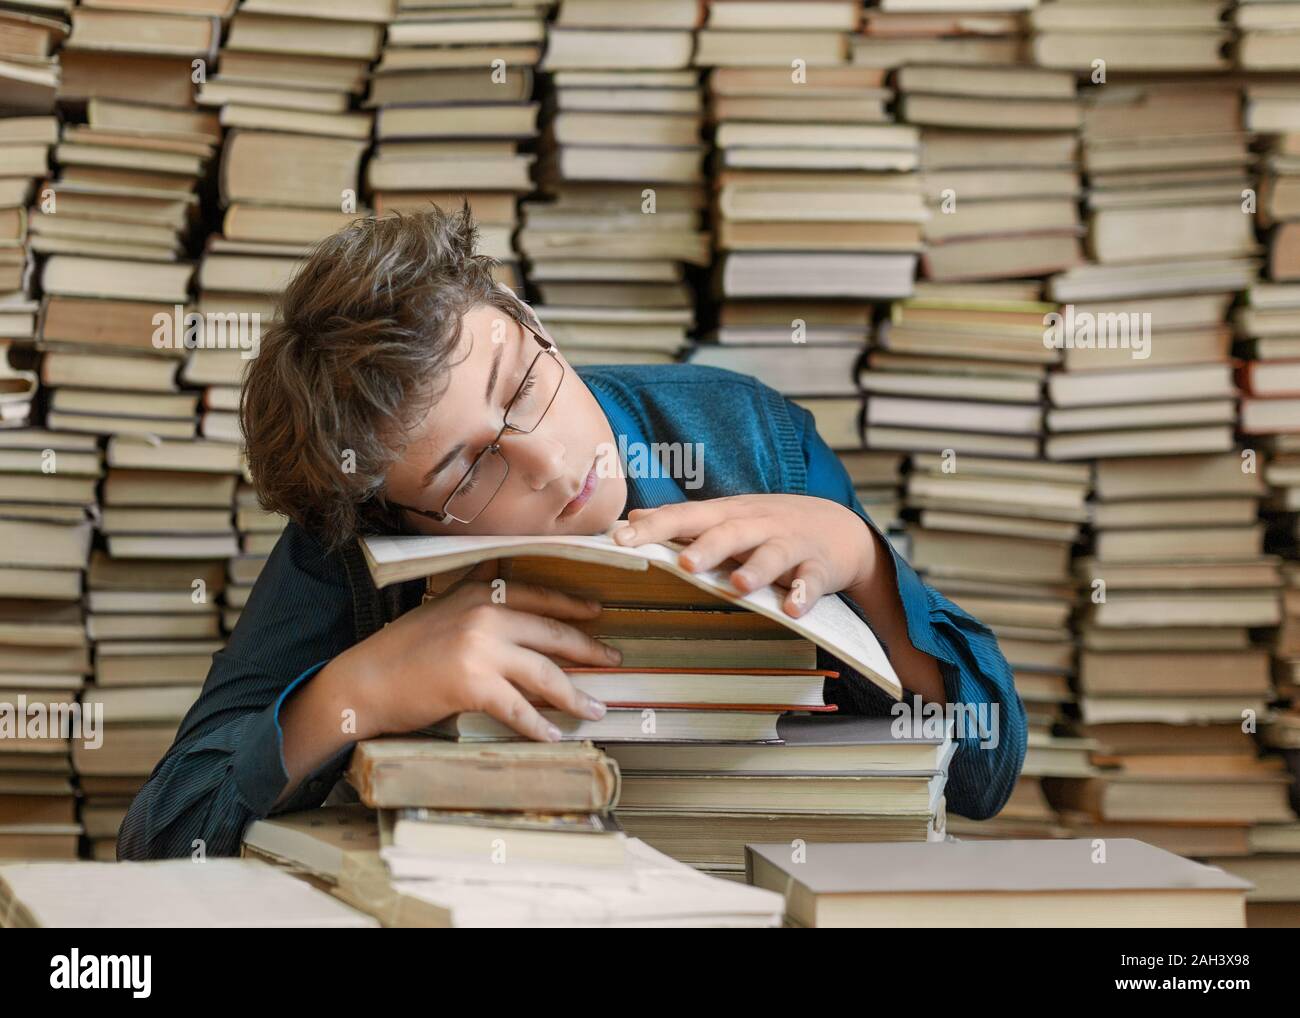 Tired young boy and books. Tired young boy sitting and sleeping ...